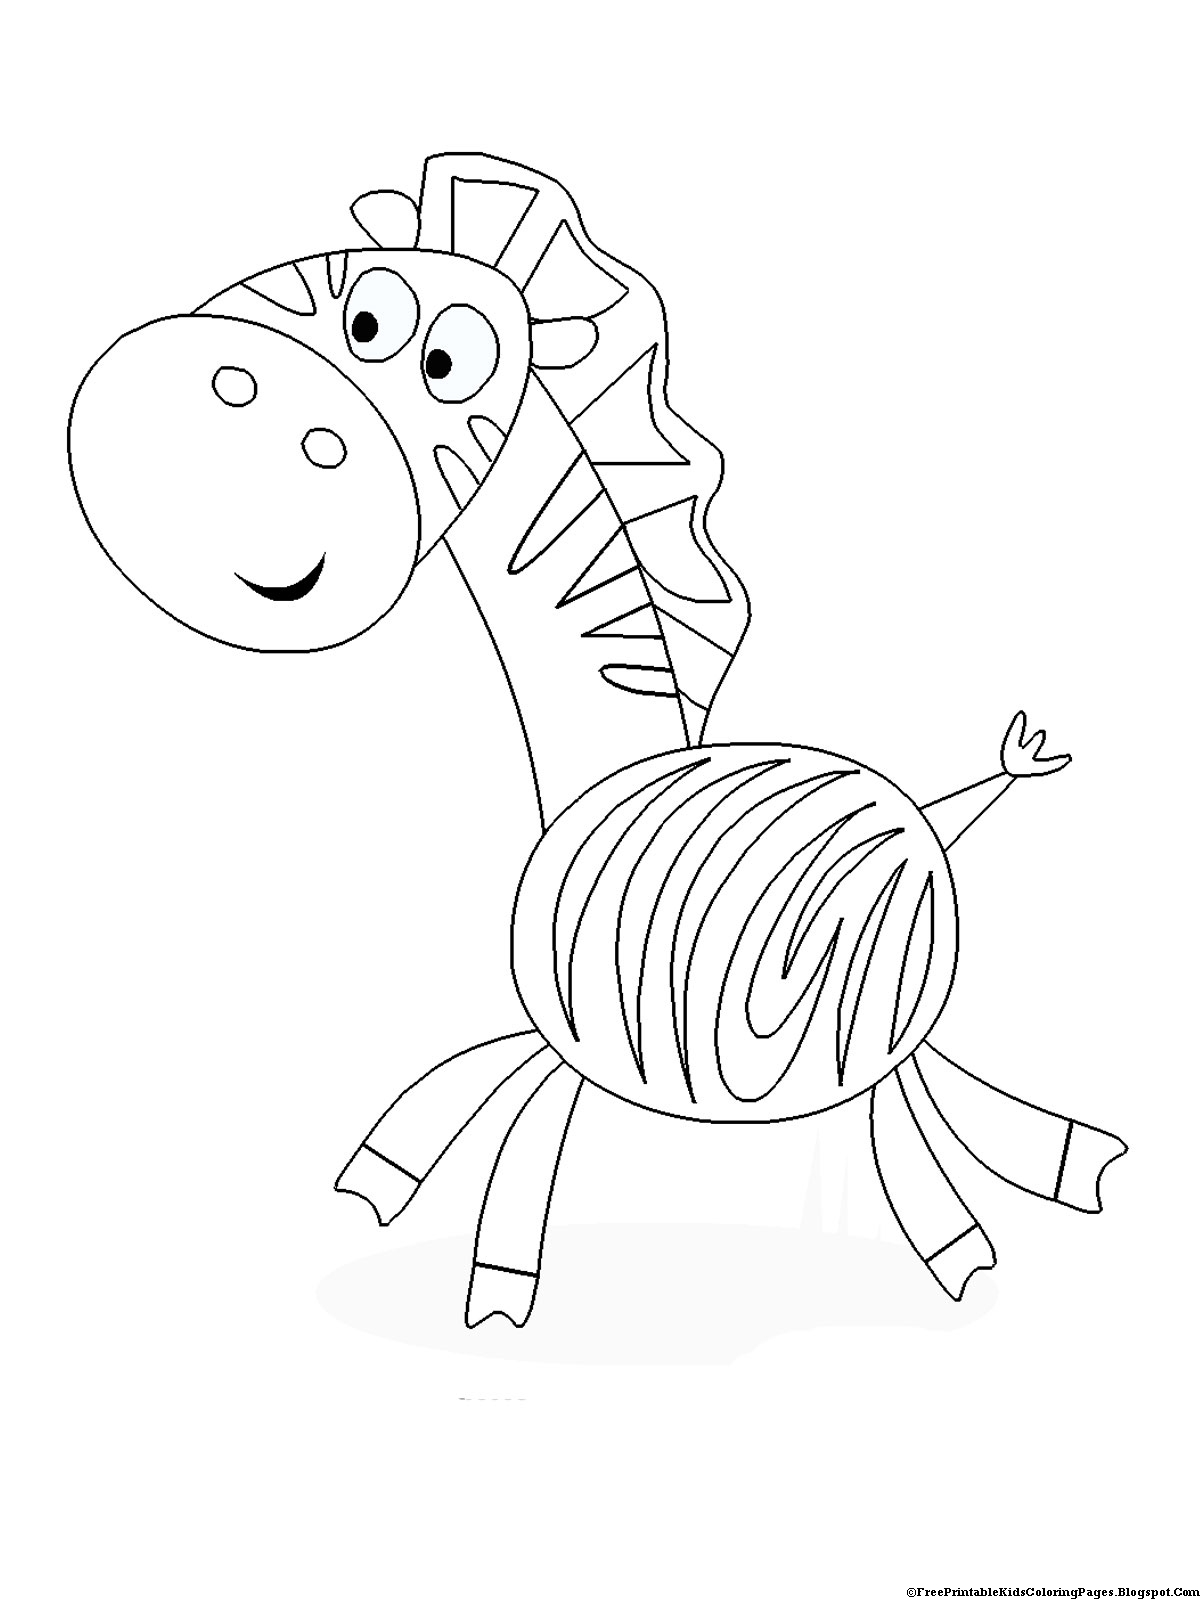 Printable Zebra Coloring Pages - Best Coloring Pages Collections